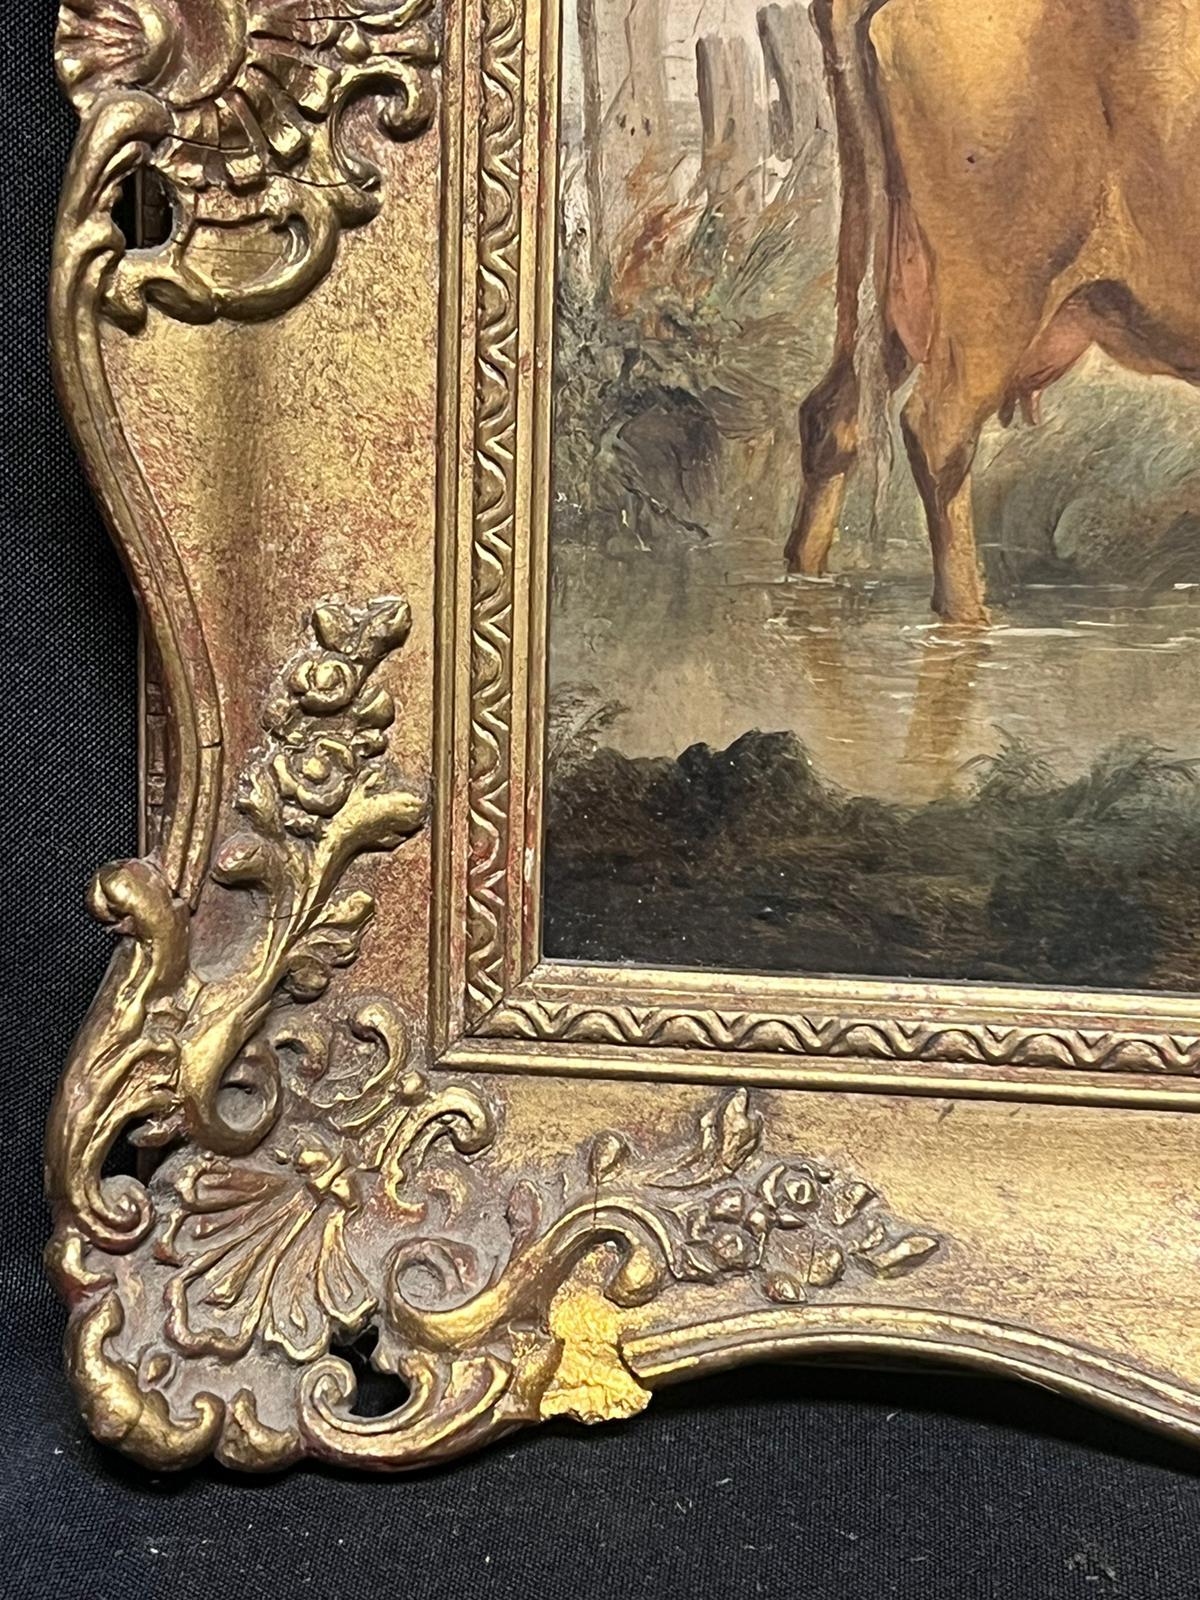 Cattle in Pastoral Landscape by Stream Victorian English Oil Painting Gilt Frame For Sale 7